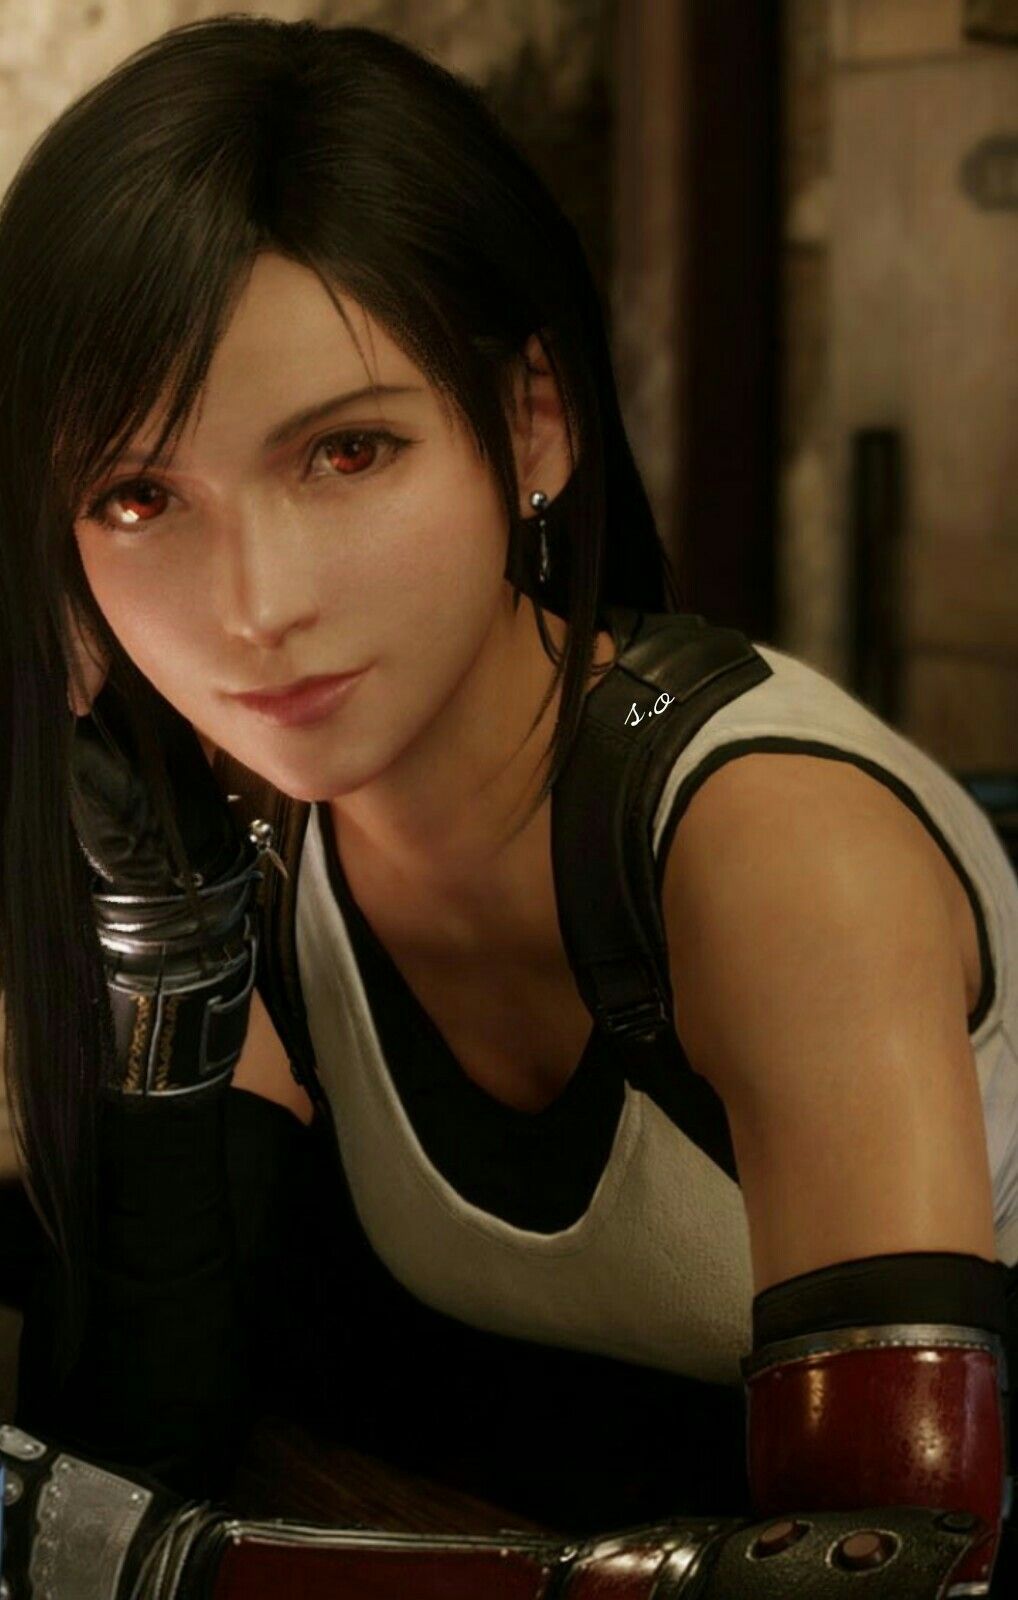 Download wallpaper 750x1334 game character final fantasy tifa lockhart  iphone 7 iphone 8 750x1334 hd background 28480